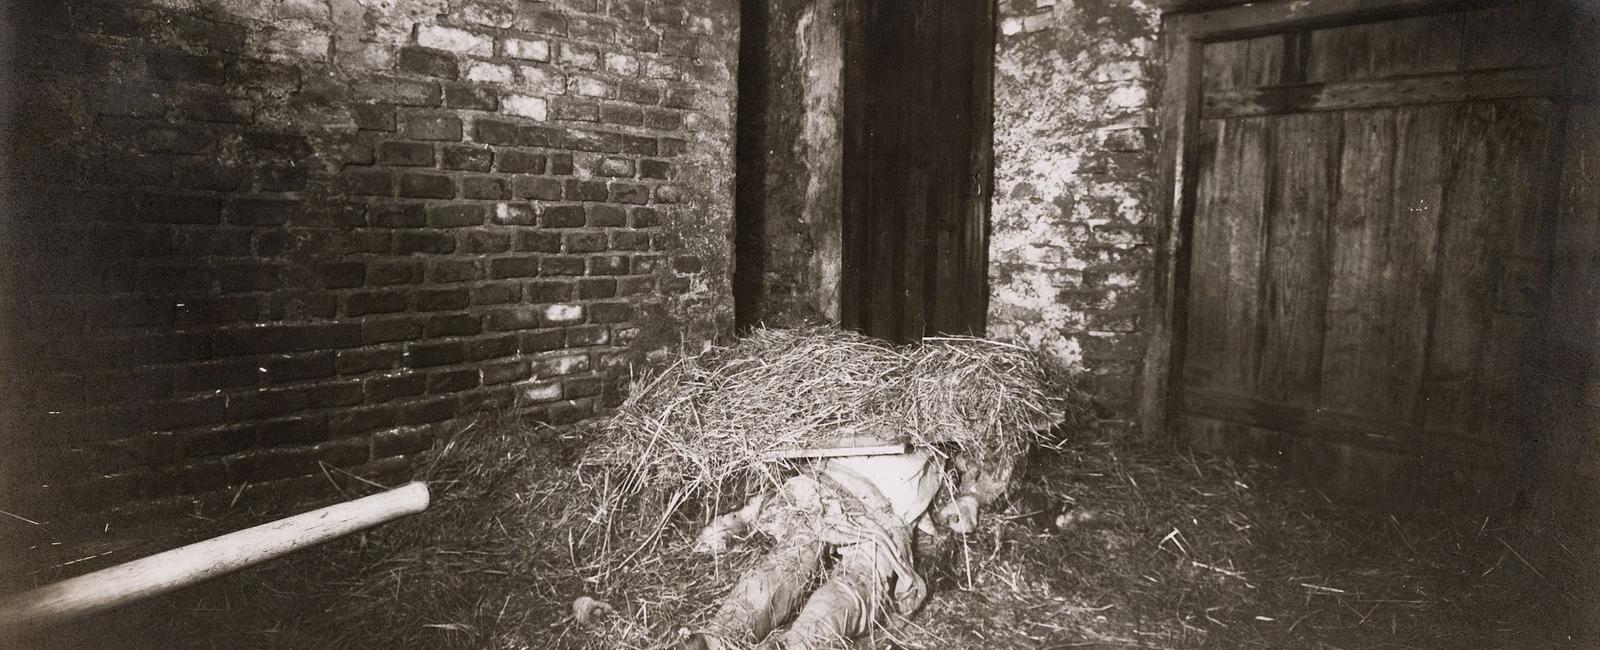 Hinterkaifeck was a small german farm north of munich one night in 1922 all six inhabitants of the farm were murdered with a mattock the crime was never solved and people believed the farm was haunted